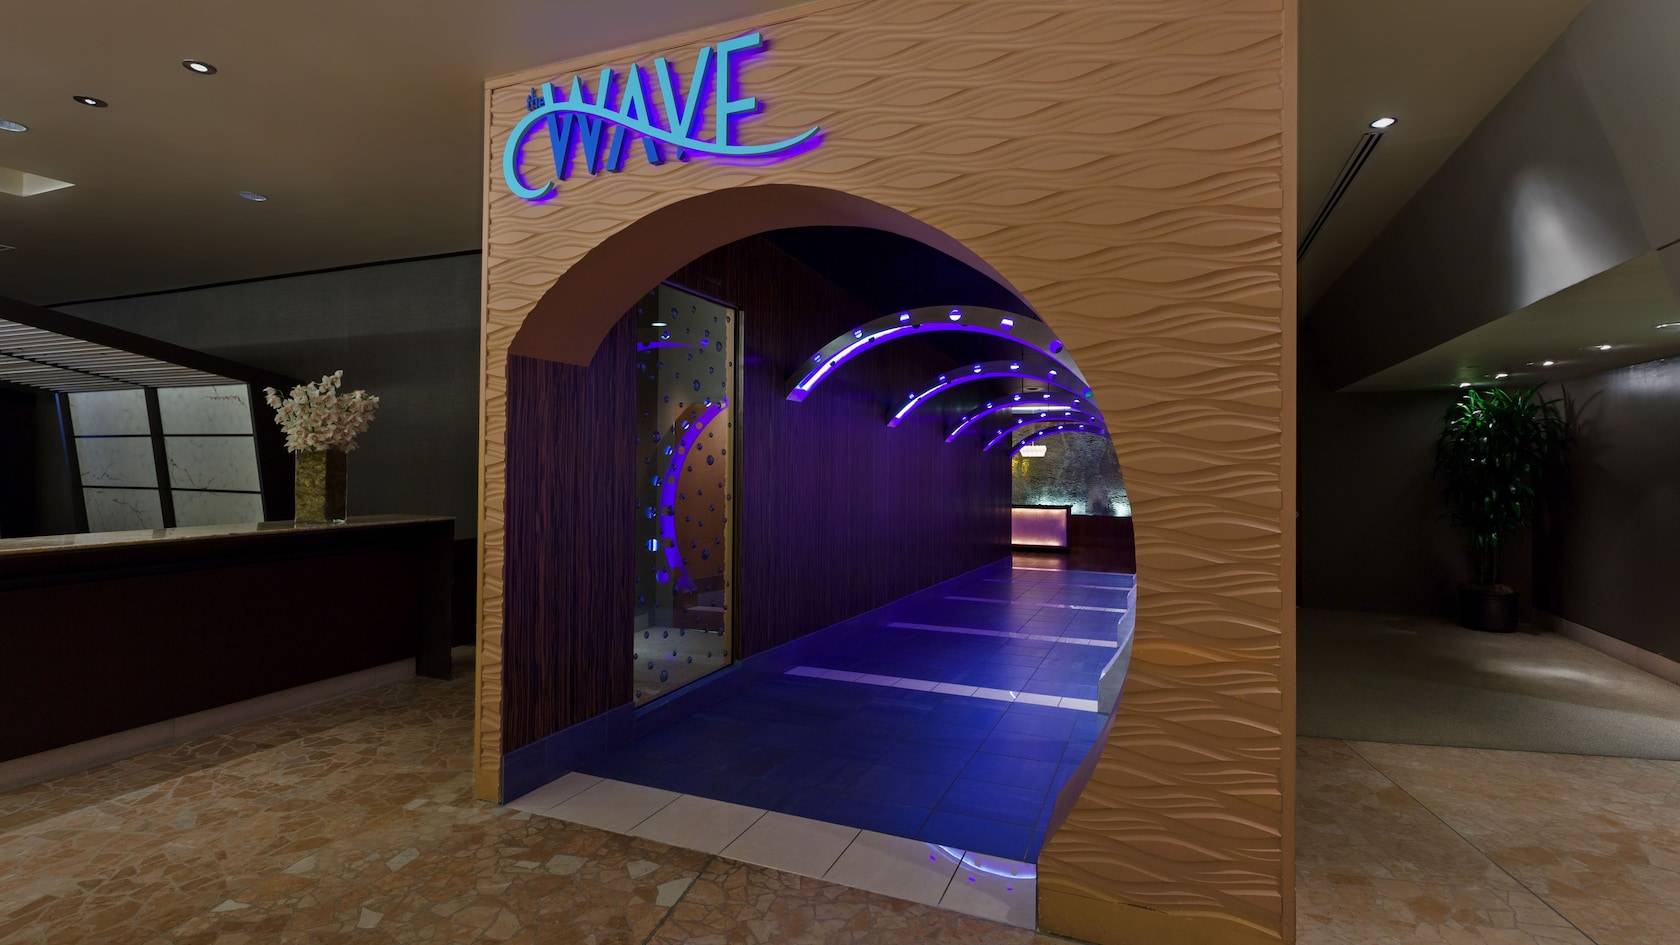 The Wave closes July 16